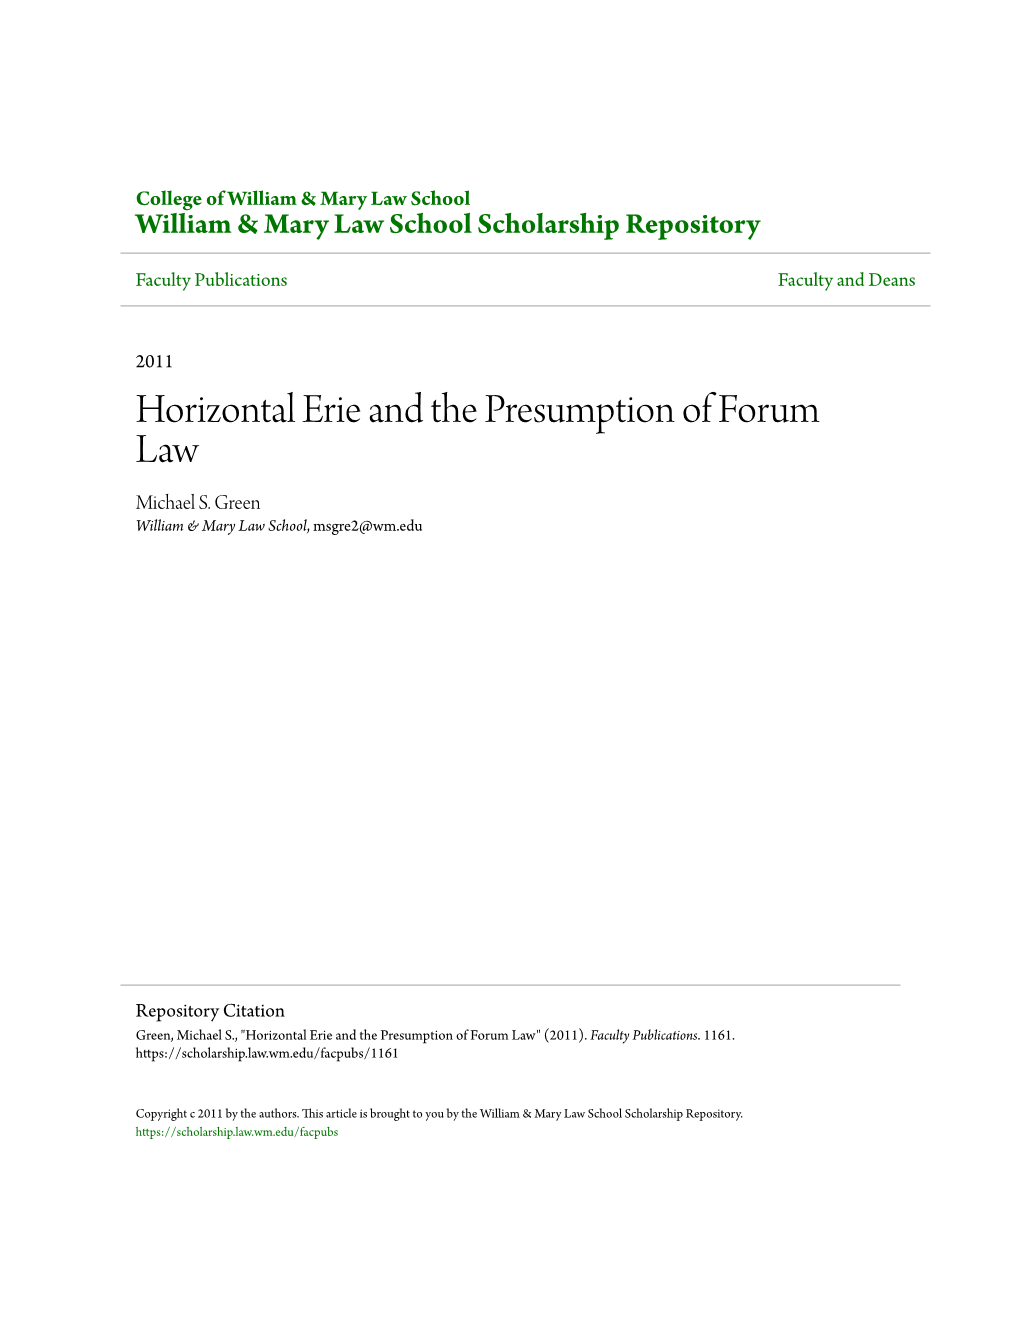 Horizontal Erie and the Presumption of Forum Law Michael S